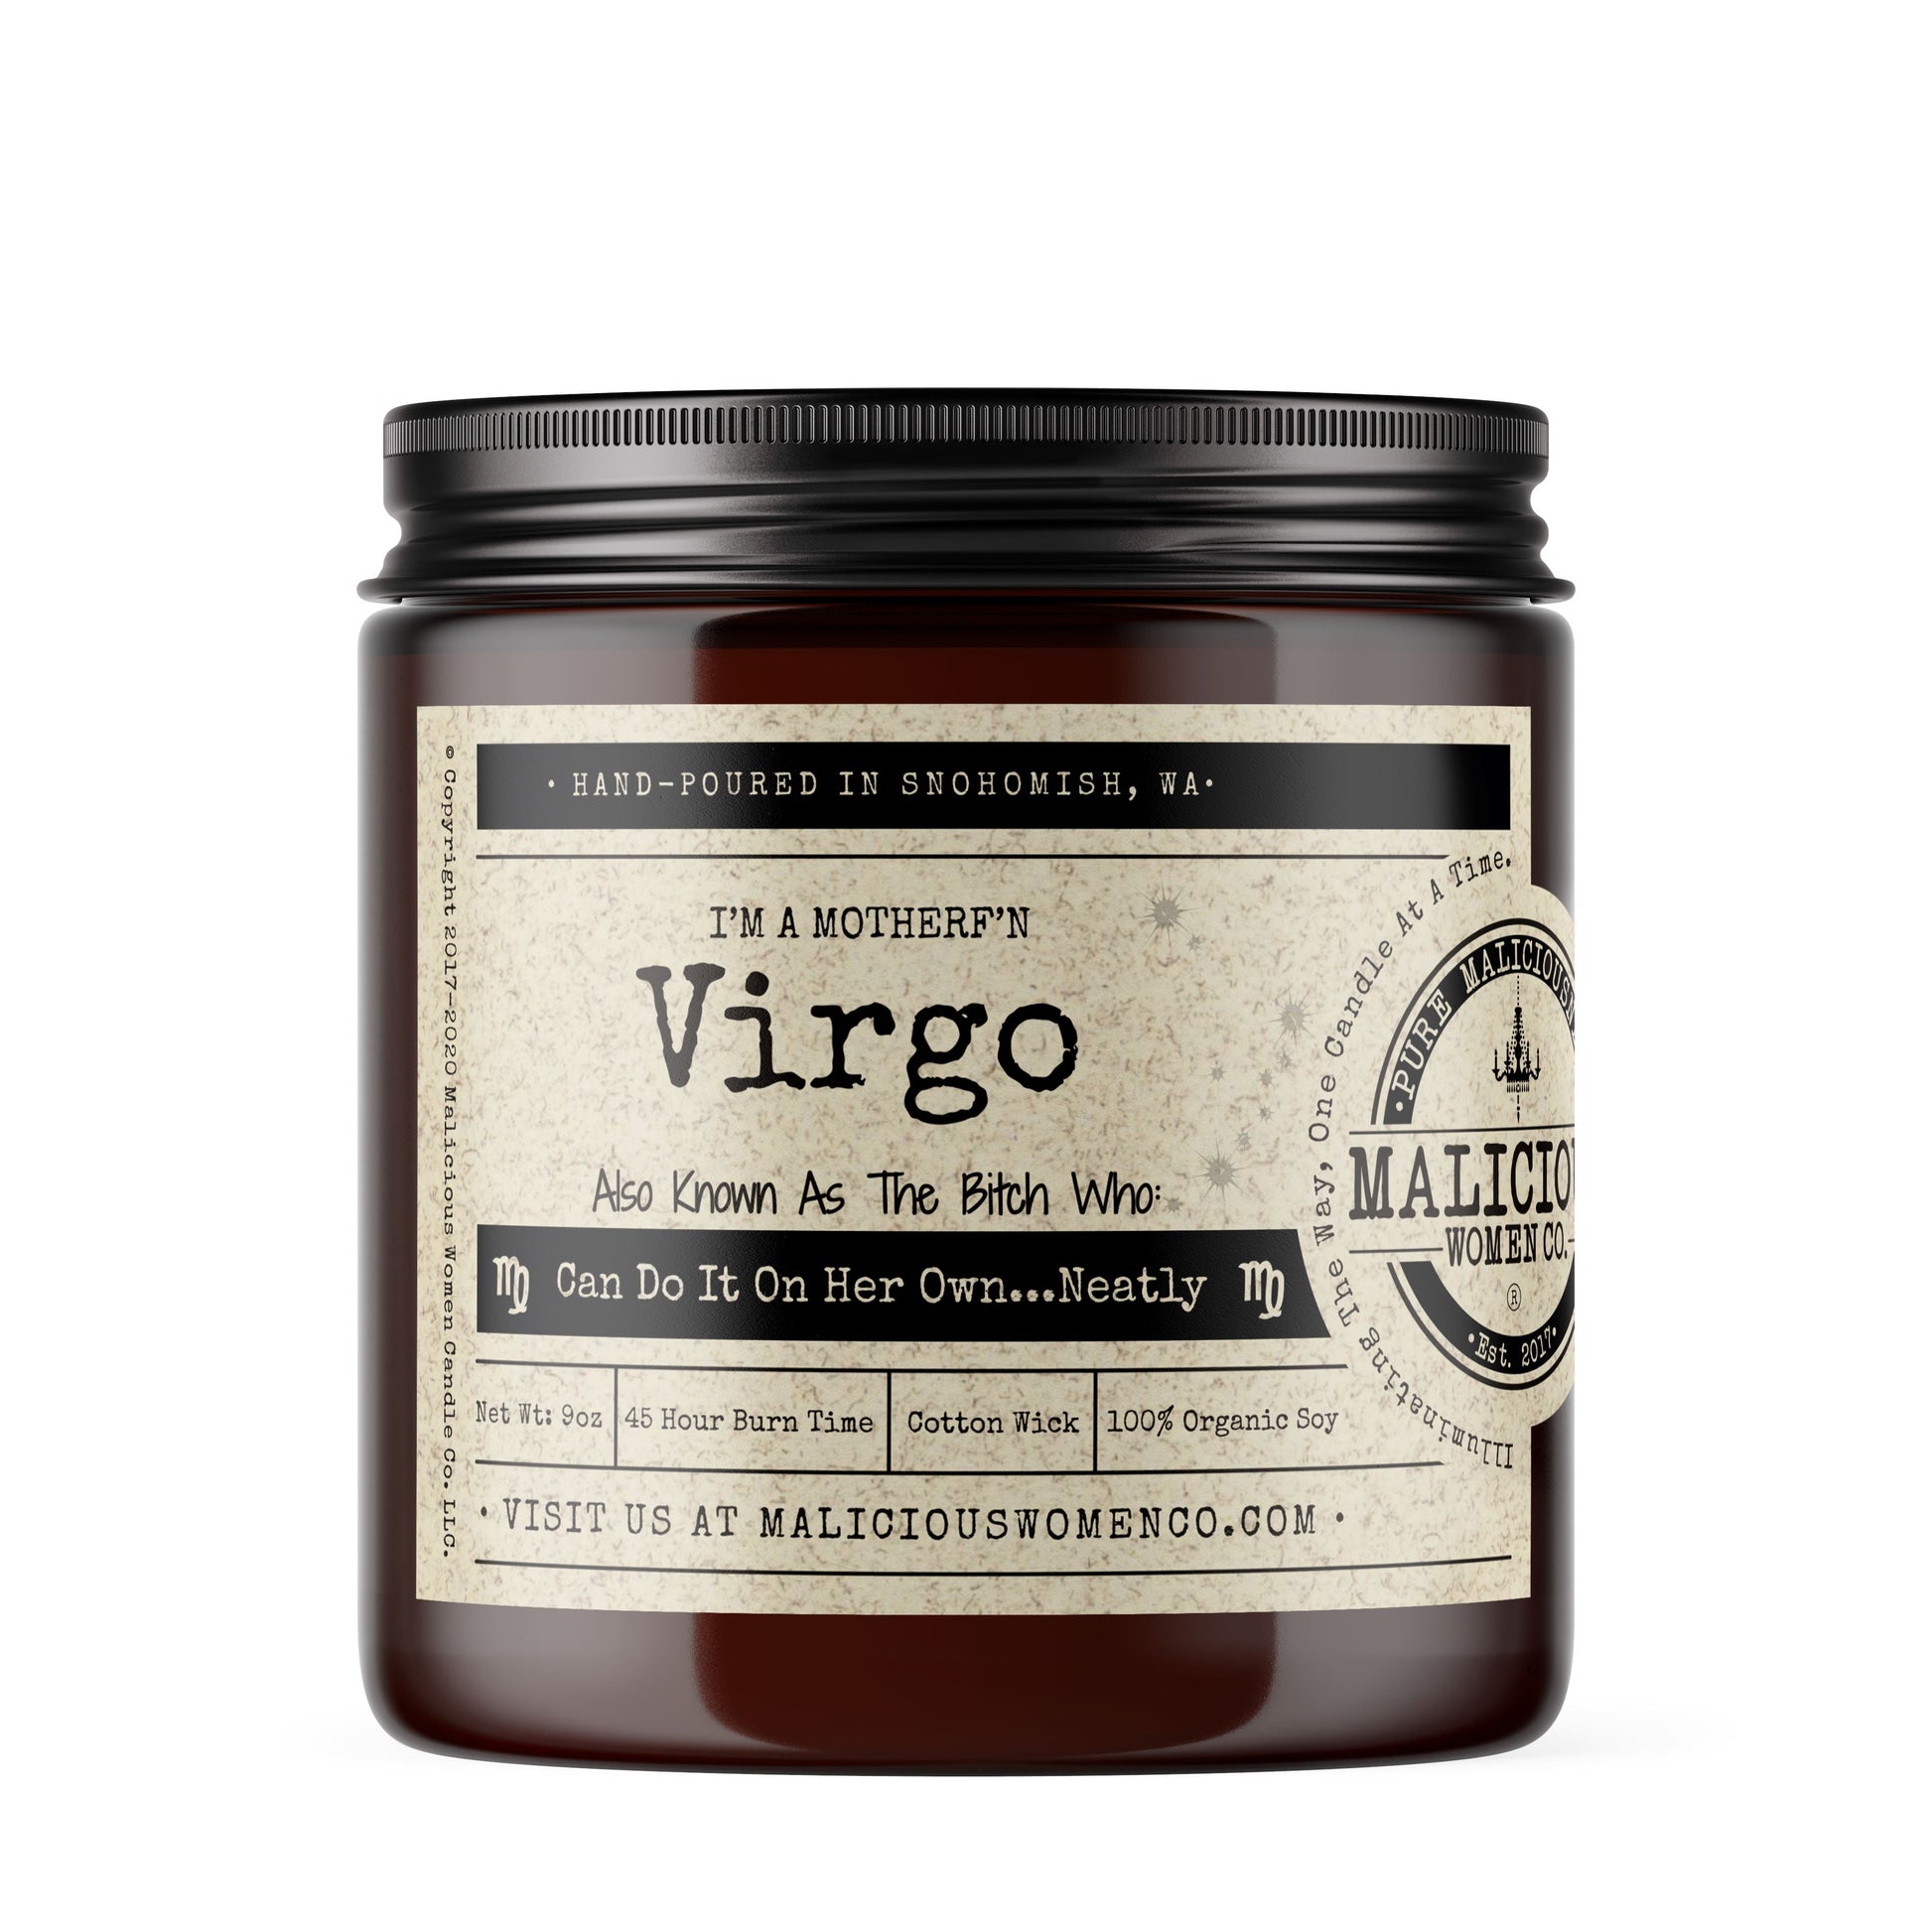 I'm a MotherF'n Virgo (Aug 23-Sep 22) The Zodiac Bitch - Scent: Exotic Hemp ZodiacCandles Malicious Women Candle Co. 